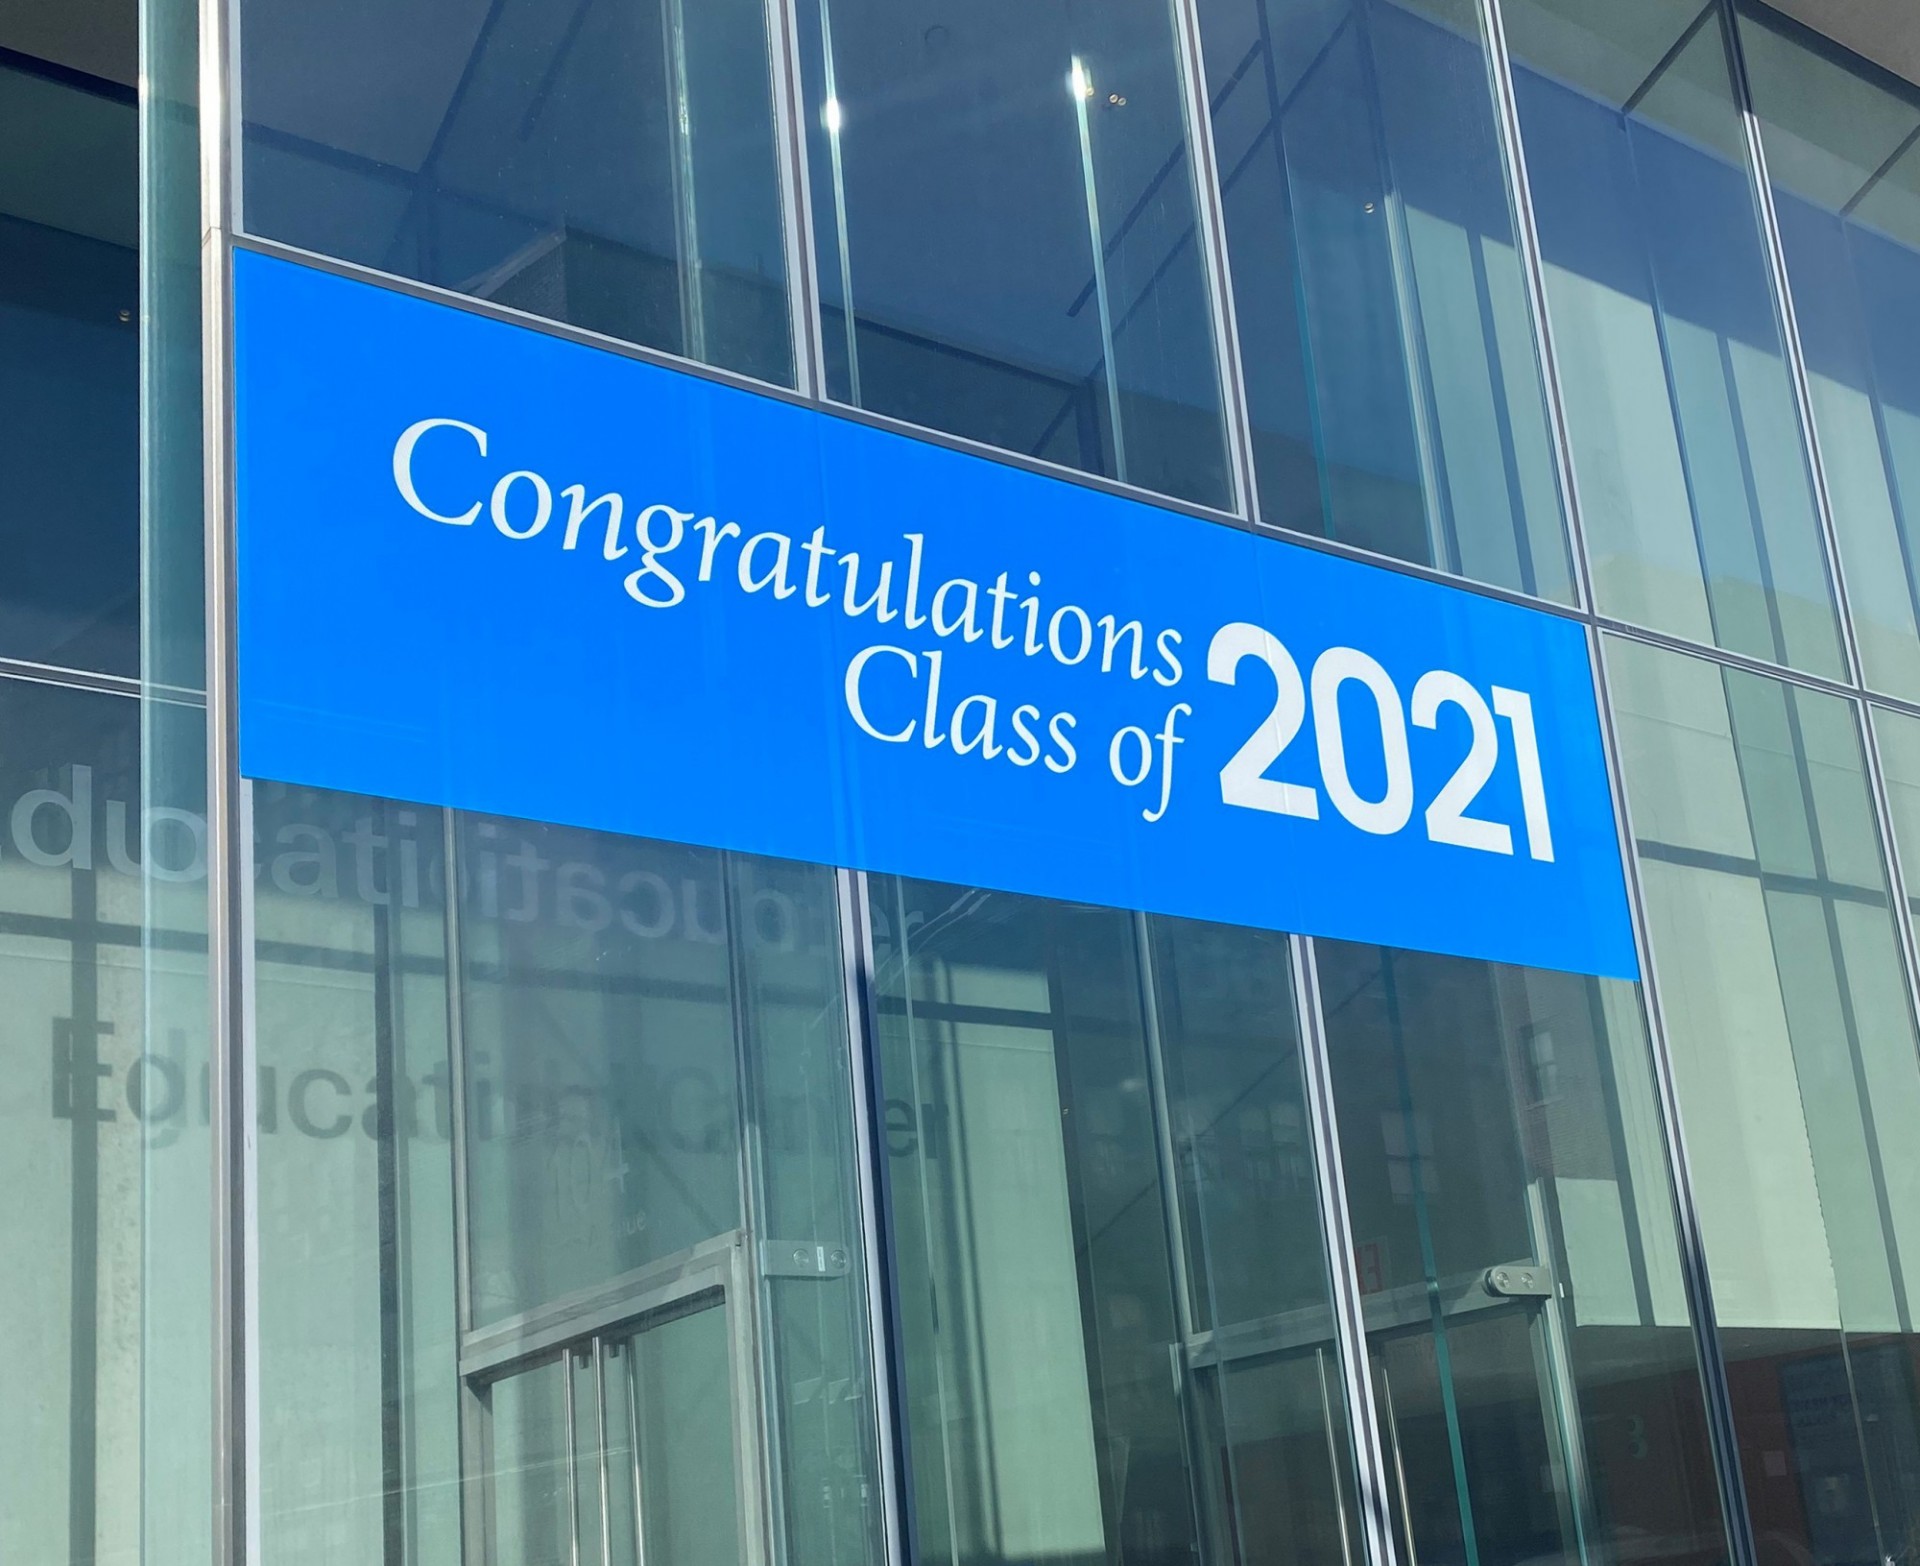 "Congratulations Class of 2021" graphic on a building window